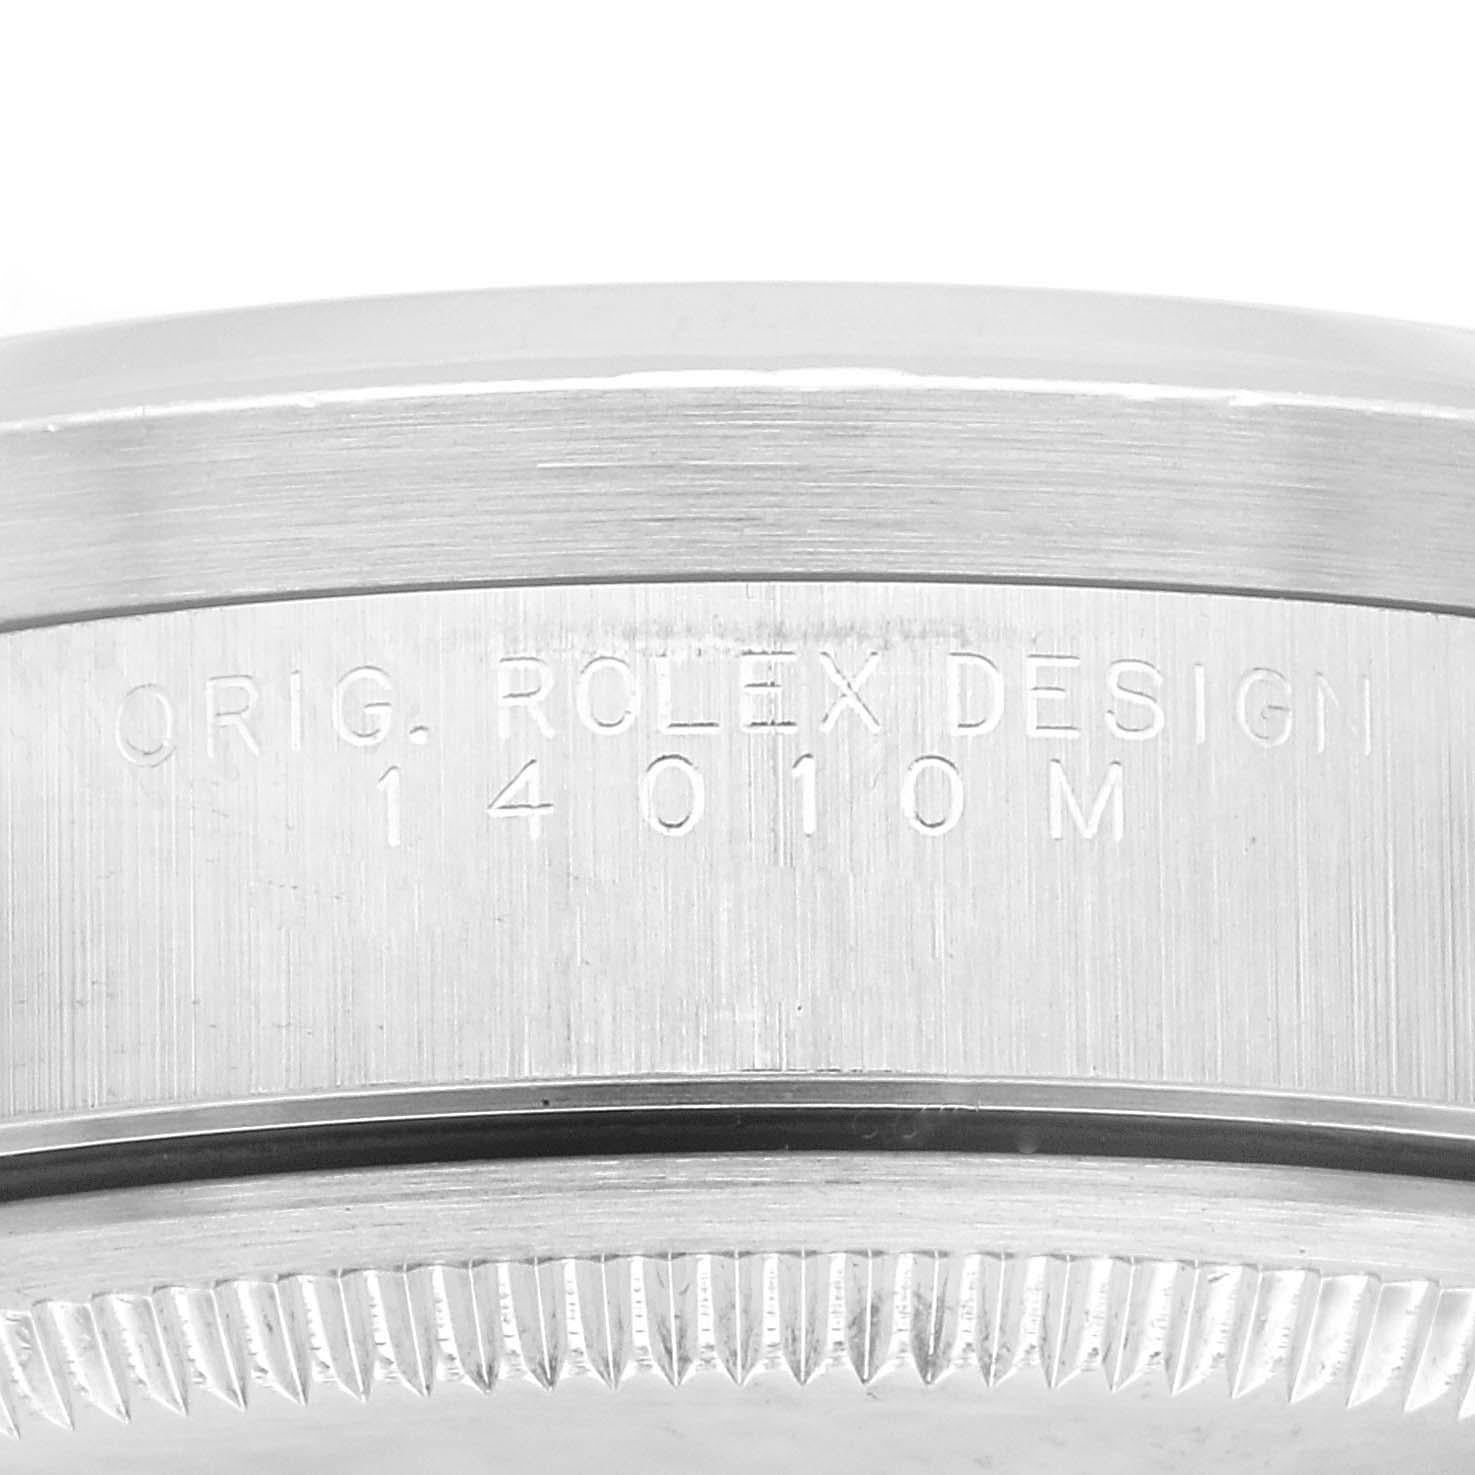 Rolex Air King Engine Turned Bezel Silver Dial Steel Mens Watch 14010. Automatic self-winding movement. Stainless steel case 34.0 mm in diameter. Rolex logo on the crown. Stainless steel engine turned bezel. Scratch resistant sapphire crystal.